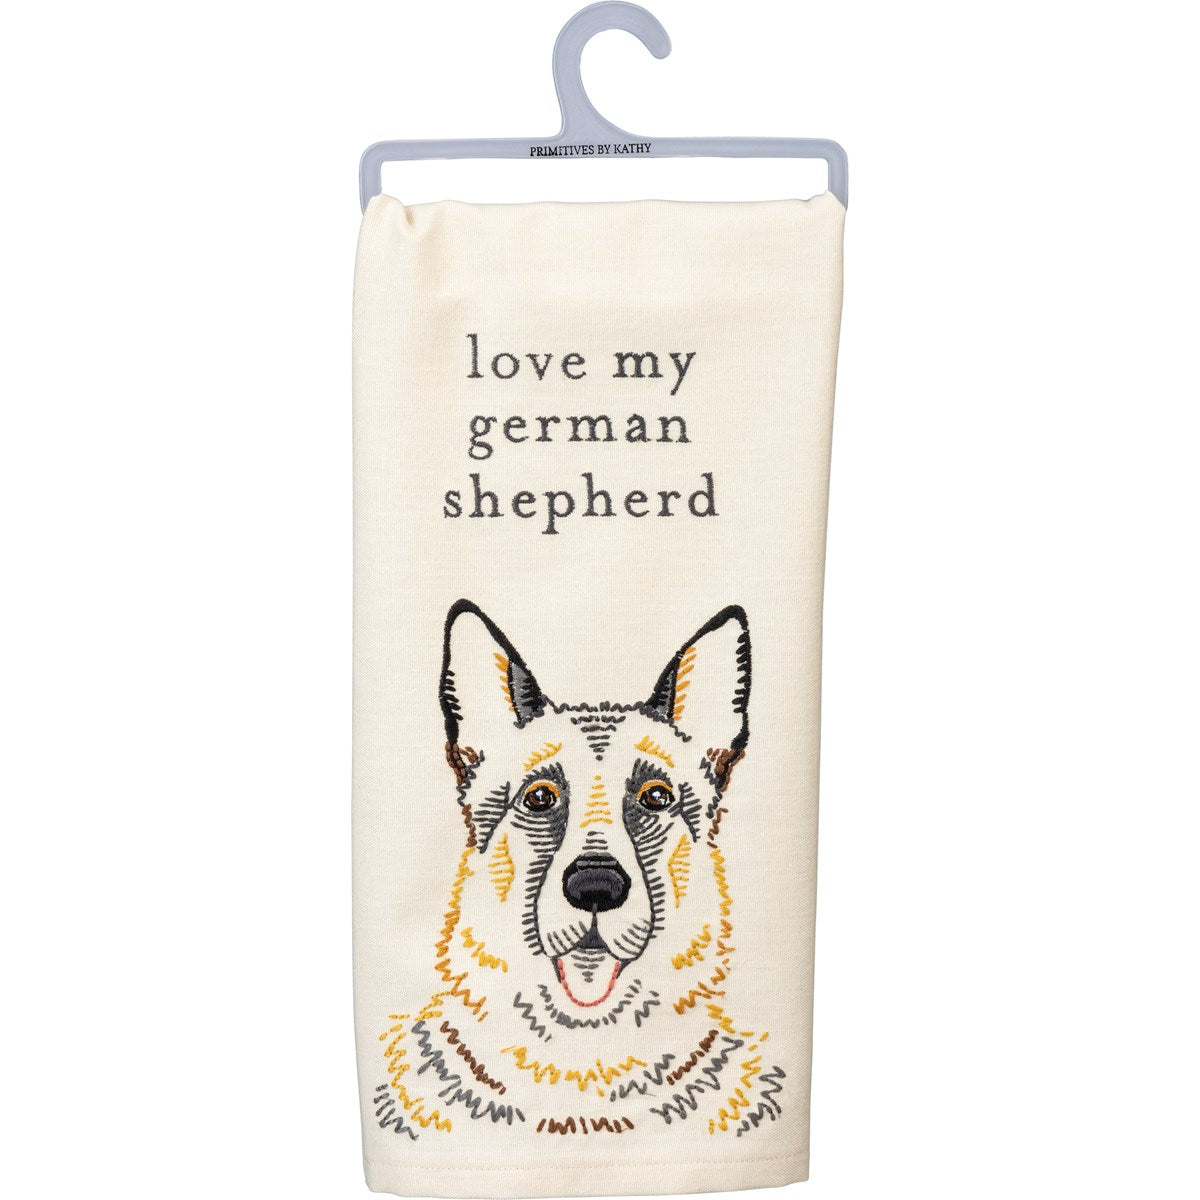 Dish Towel - Love My "___(Specific breed)" - Lake Dog and their people